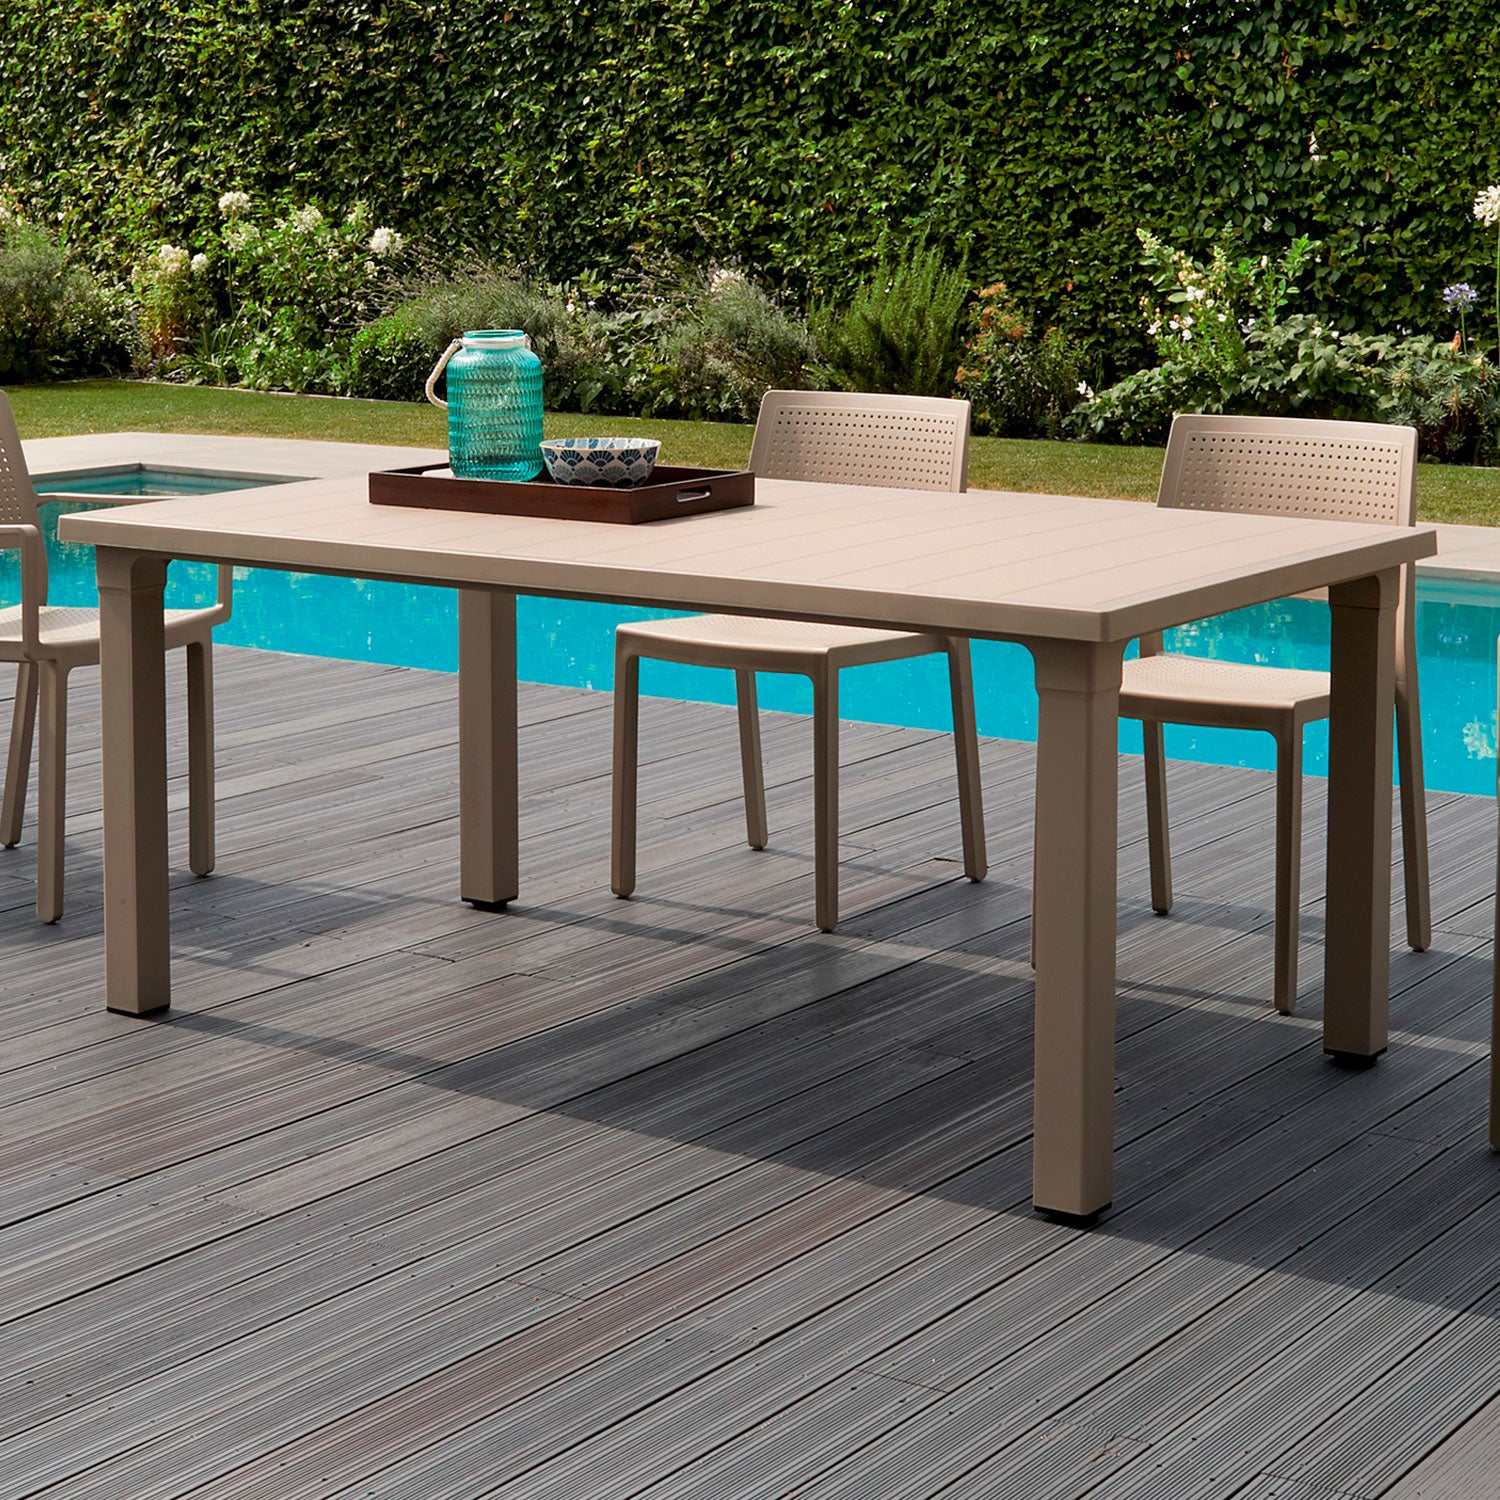 Ercole 170cm x 100cm Technopolymer Rectangular Dining Table by Scab Design